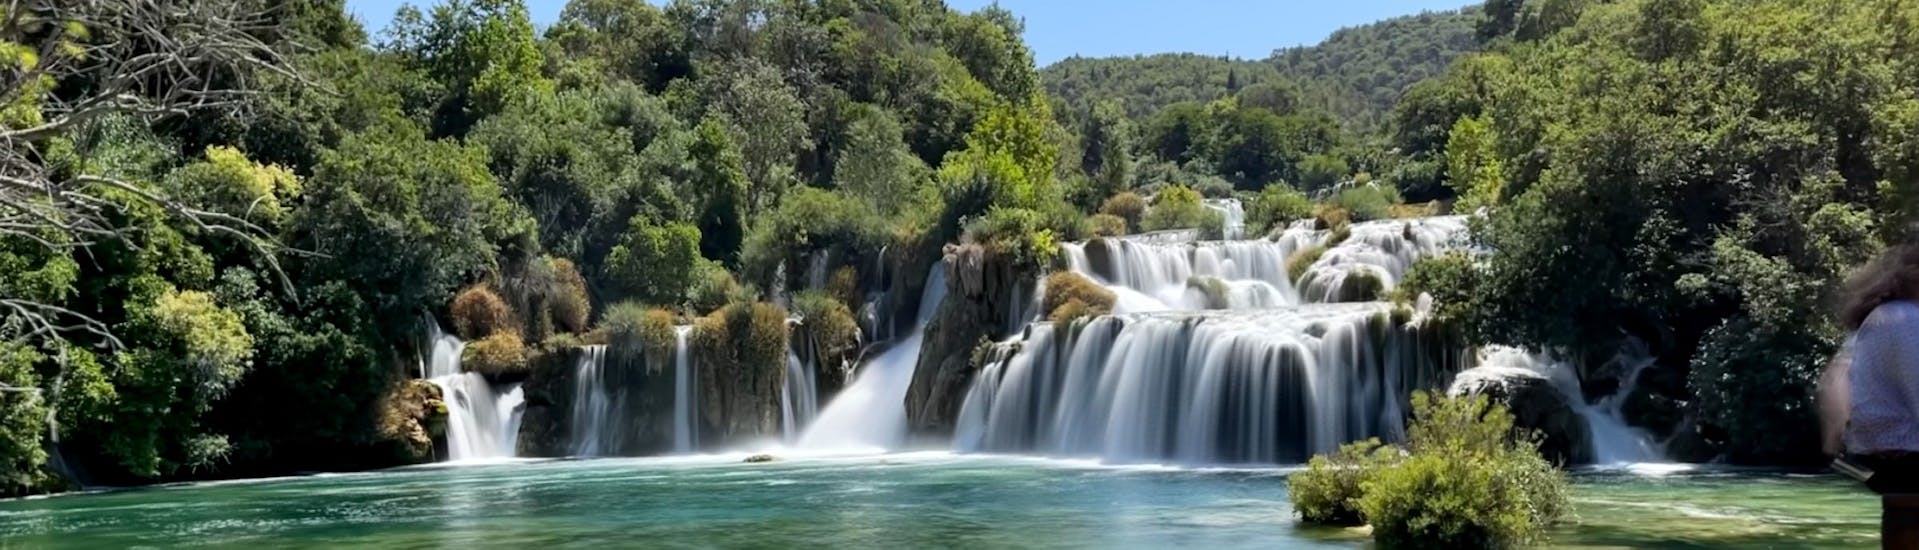 The famous Skradinski Buk falls which you can see during the Boat Trip to the Krka National Park from Šibenik with Anima Natura Šibenik.